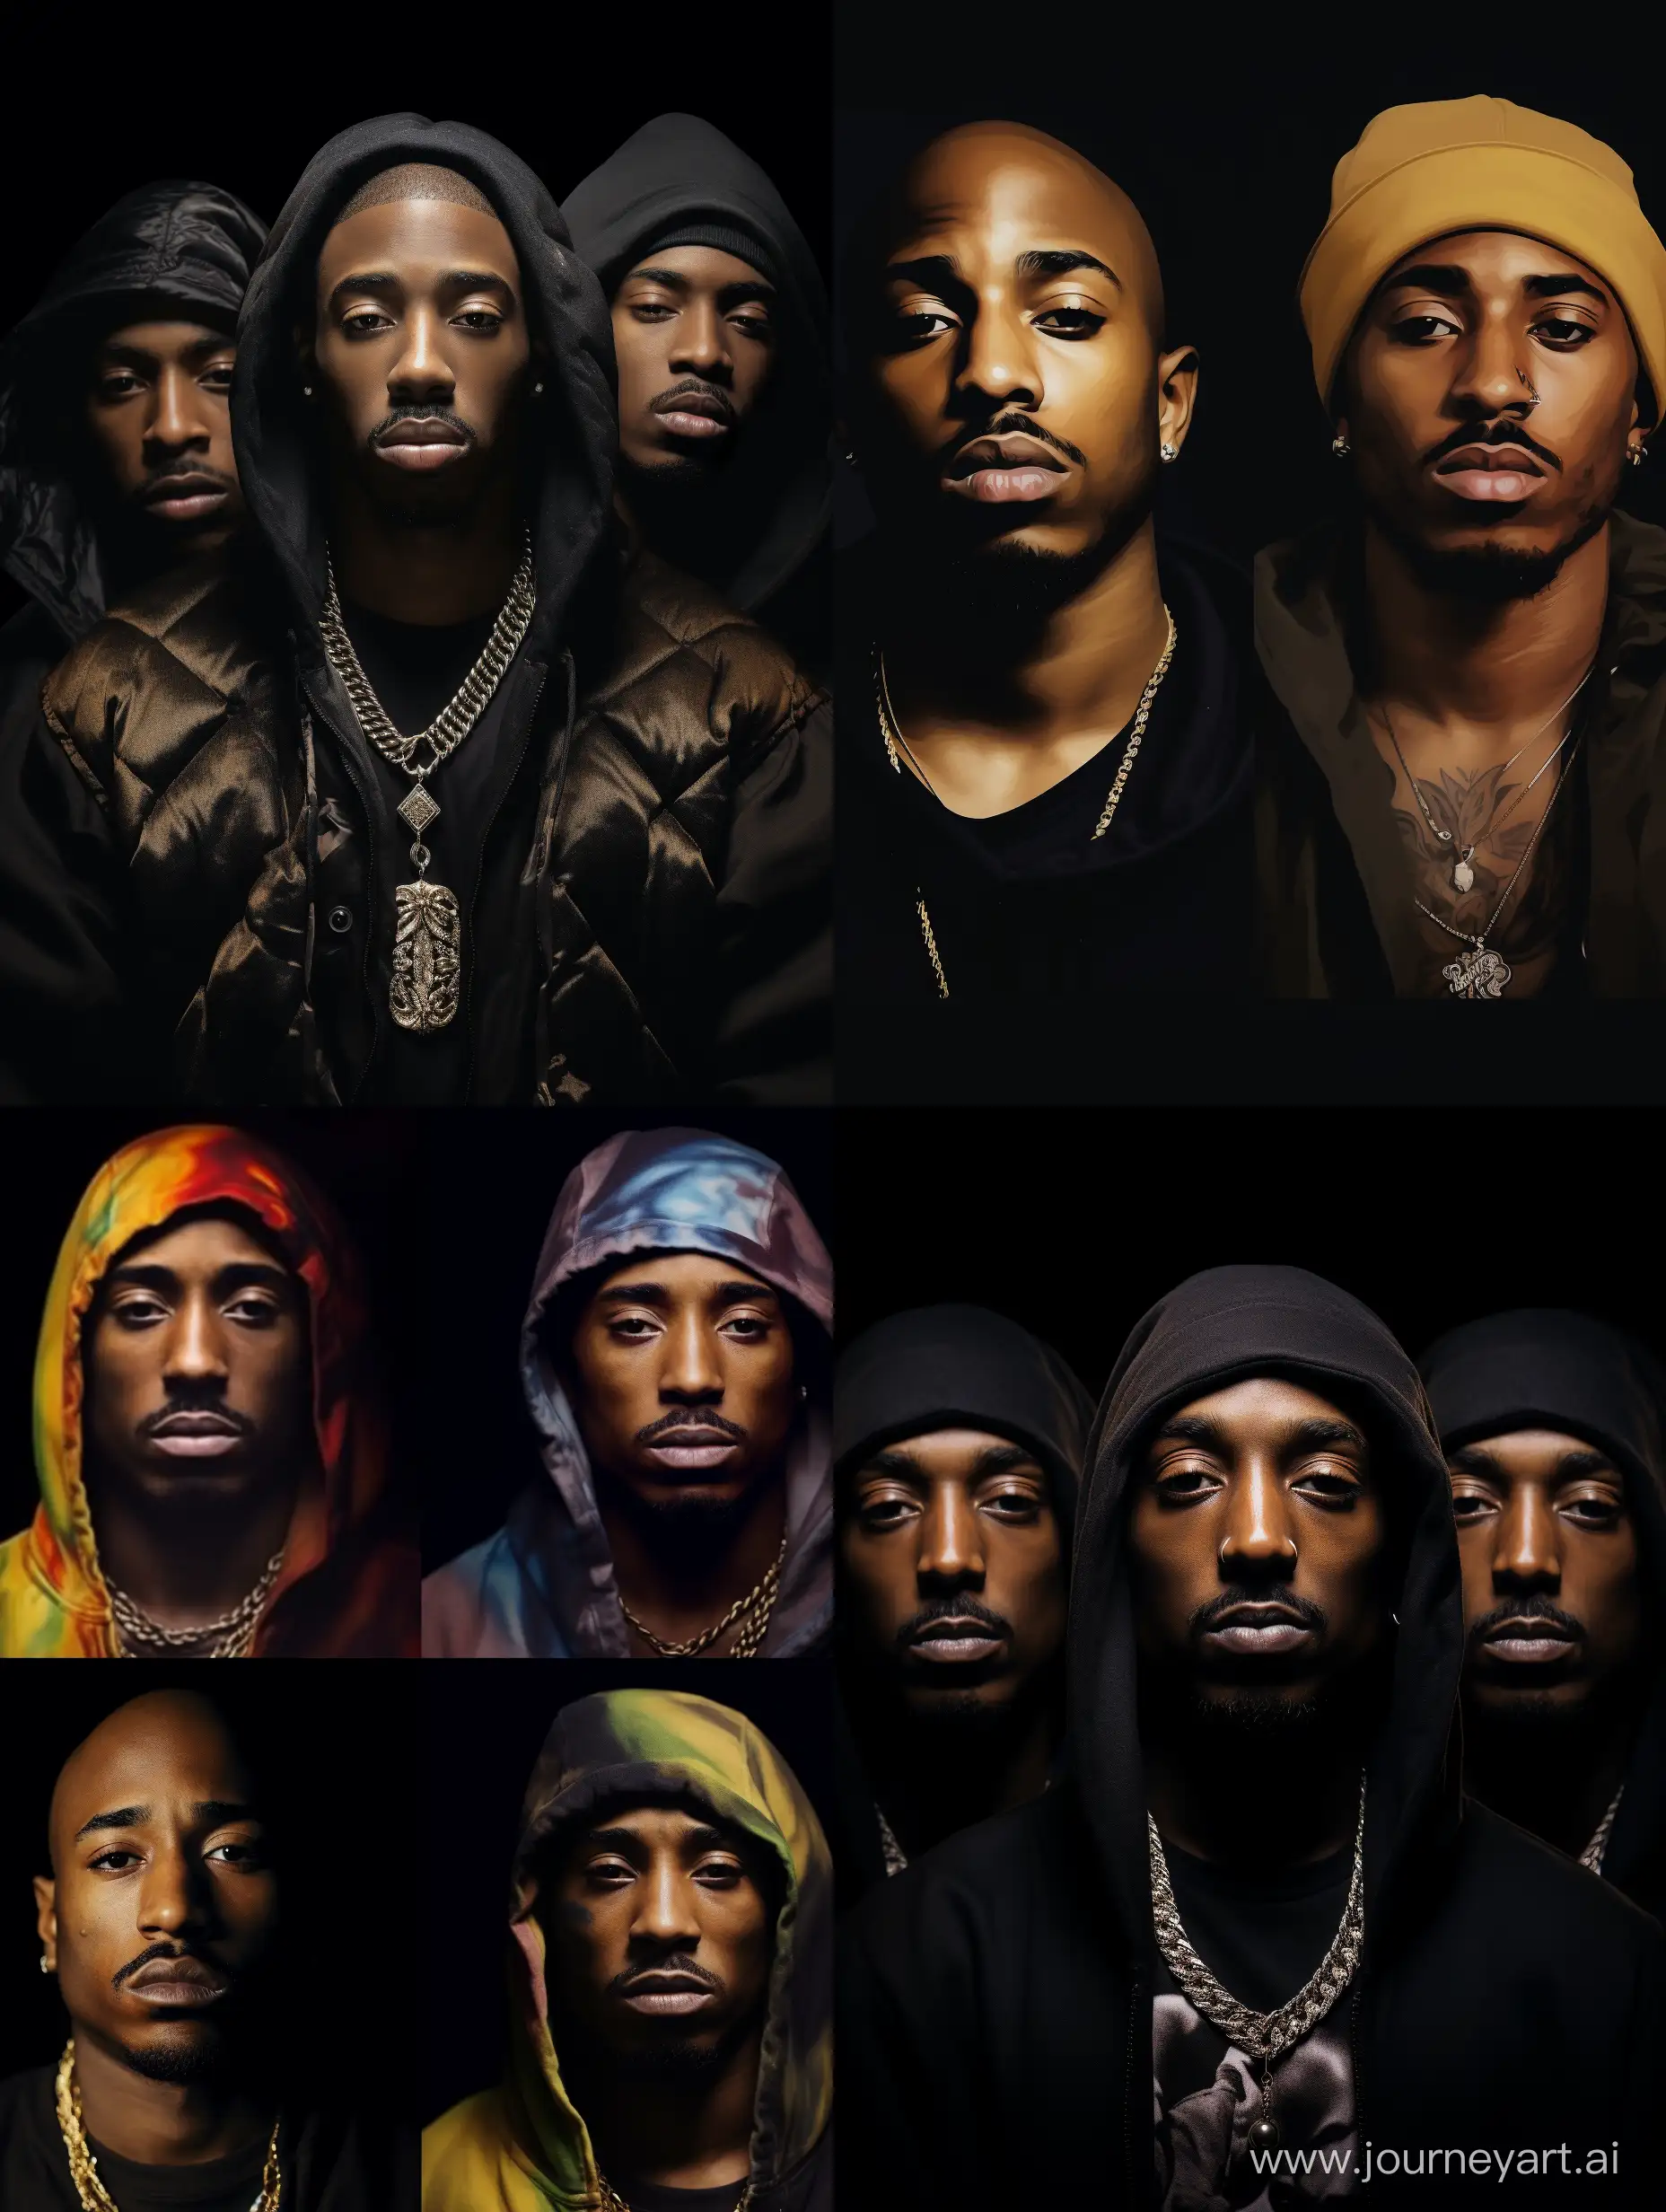 Realistic-Depiction-of-2Pac-and-Four-Black-Rappers-in-Hit-Em-Up-Video-Clip-with-MDMA-and-Ecstasy